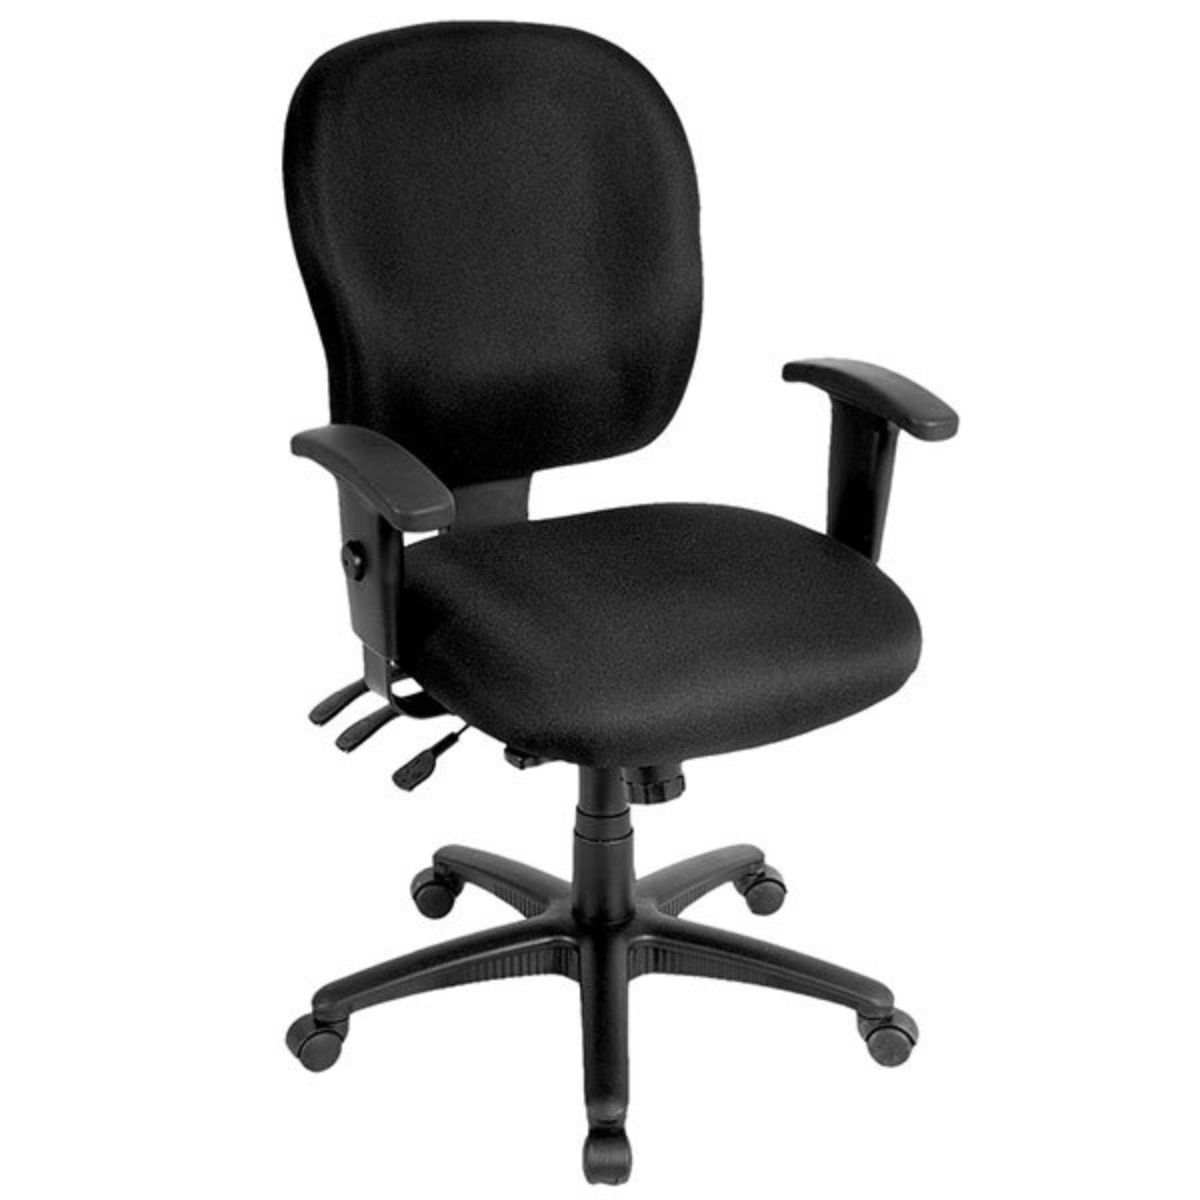 Charcoal and Black Adjustable Swivel Fabric Rolling Office Chair-372358-1